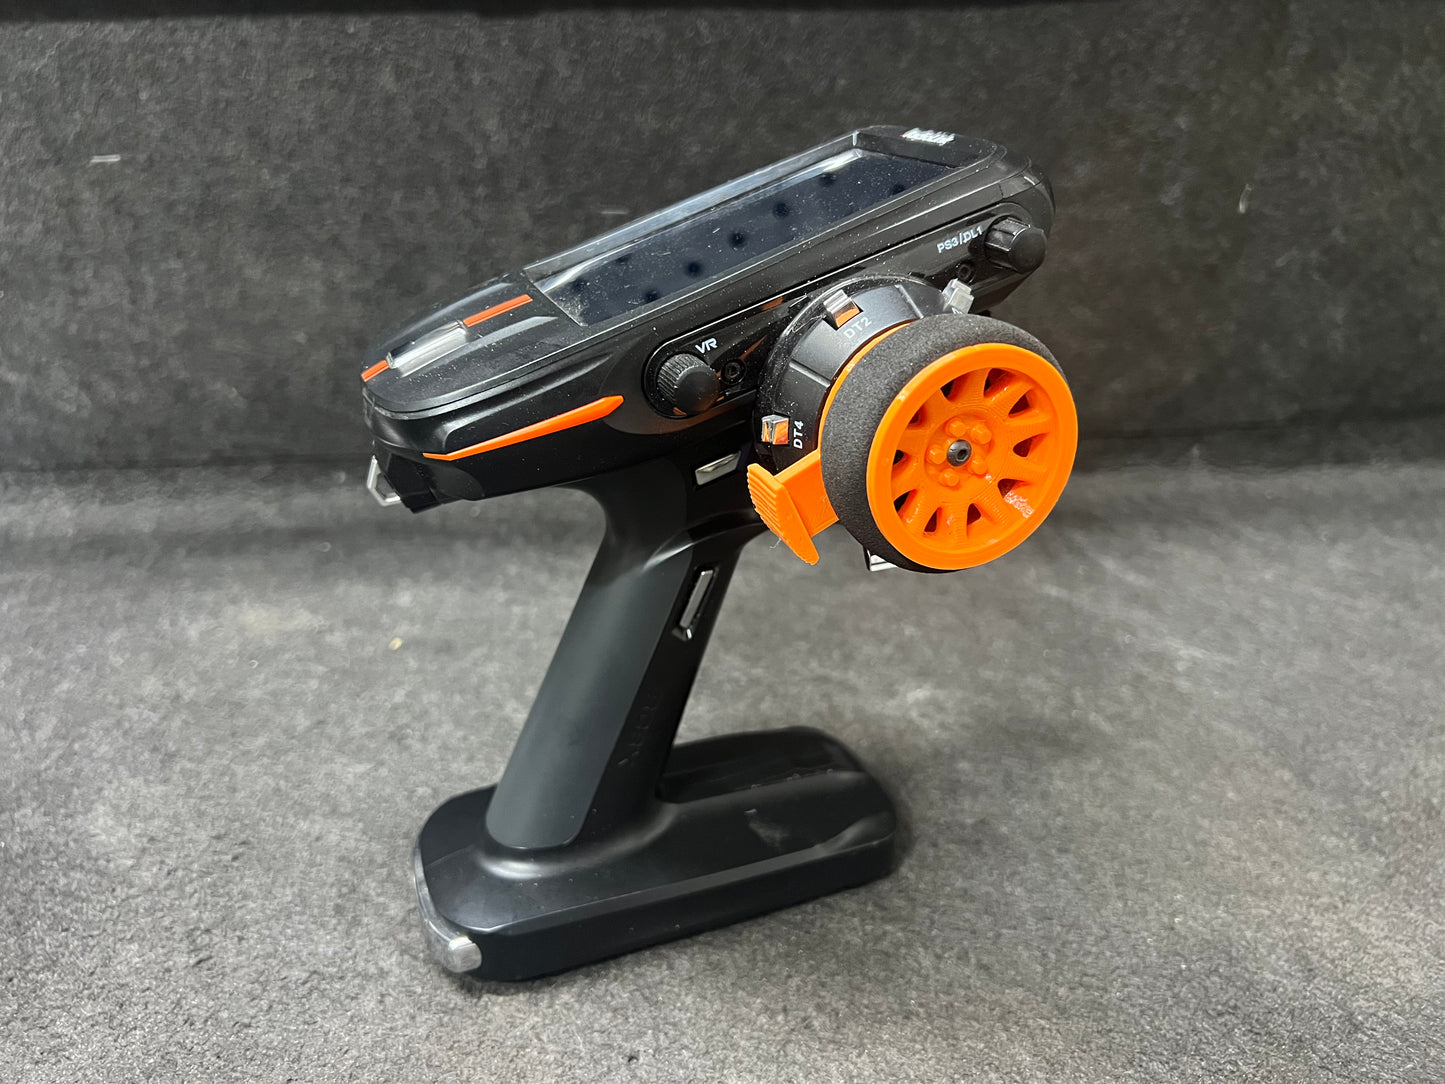 3D One handed Adapter for the RADIOLINK RC8x